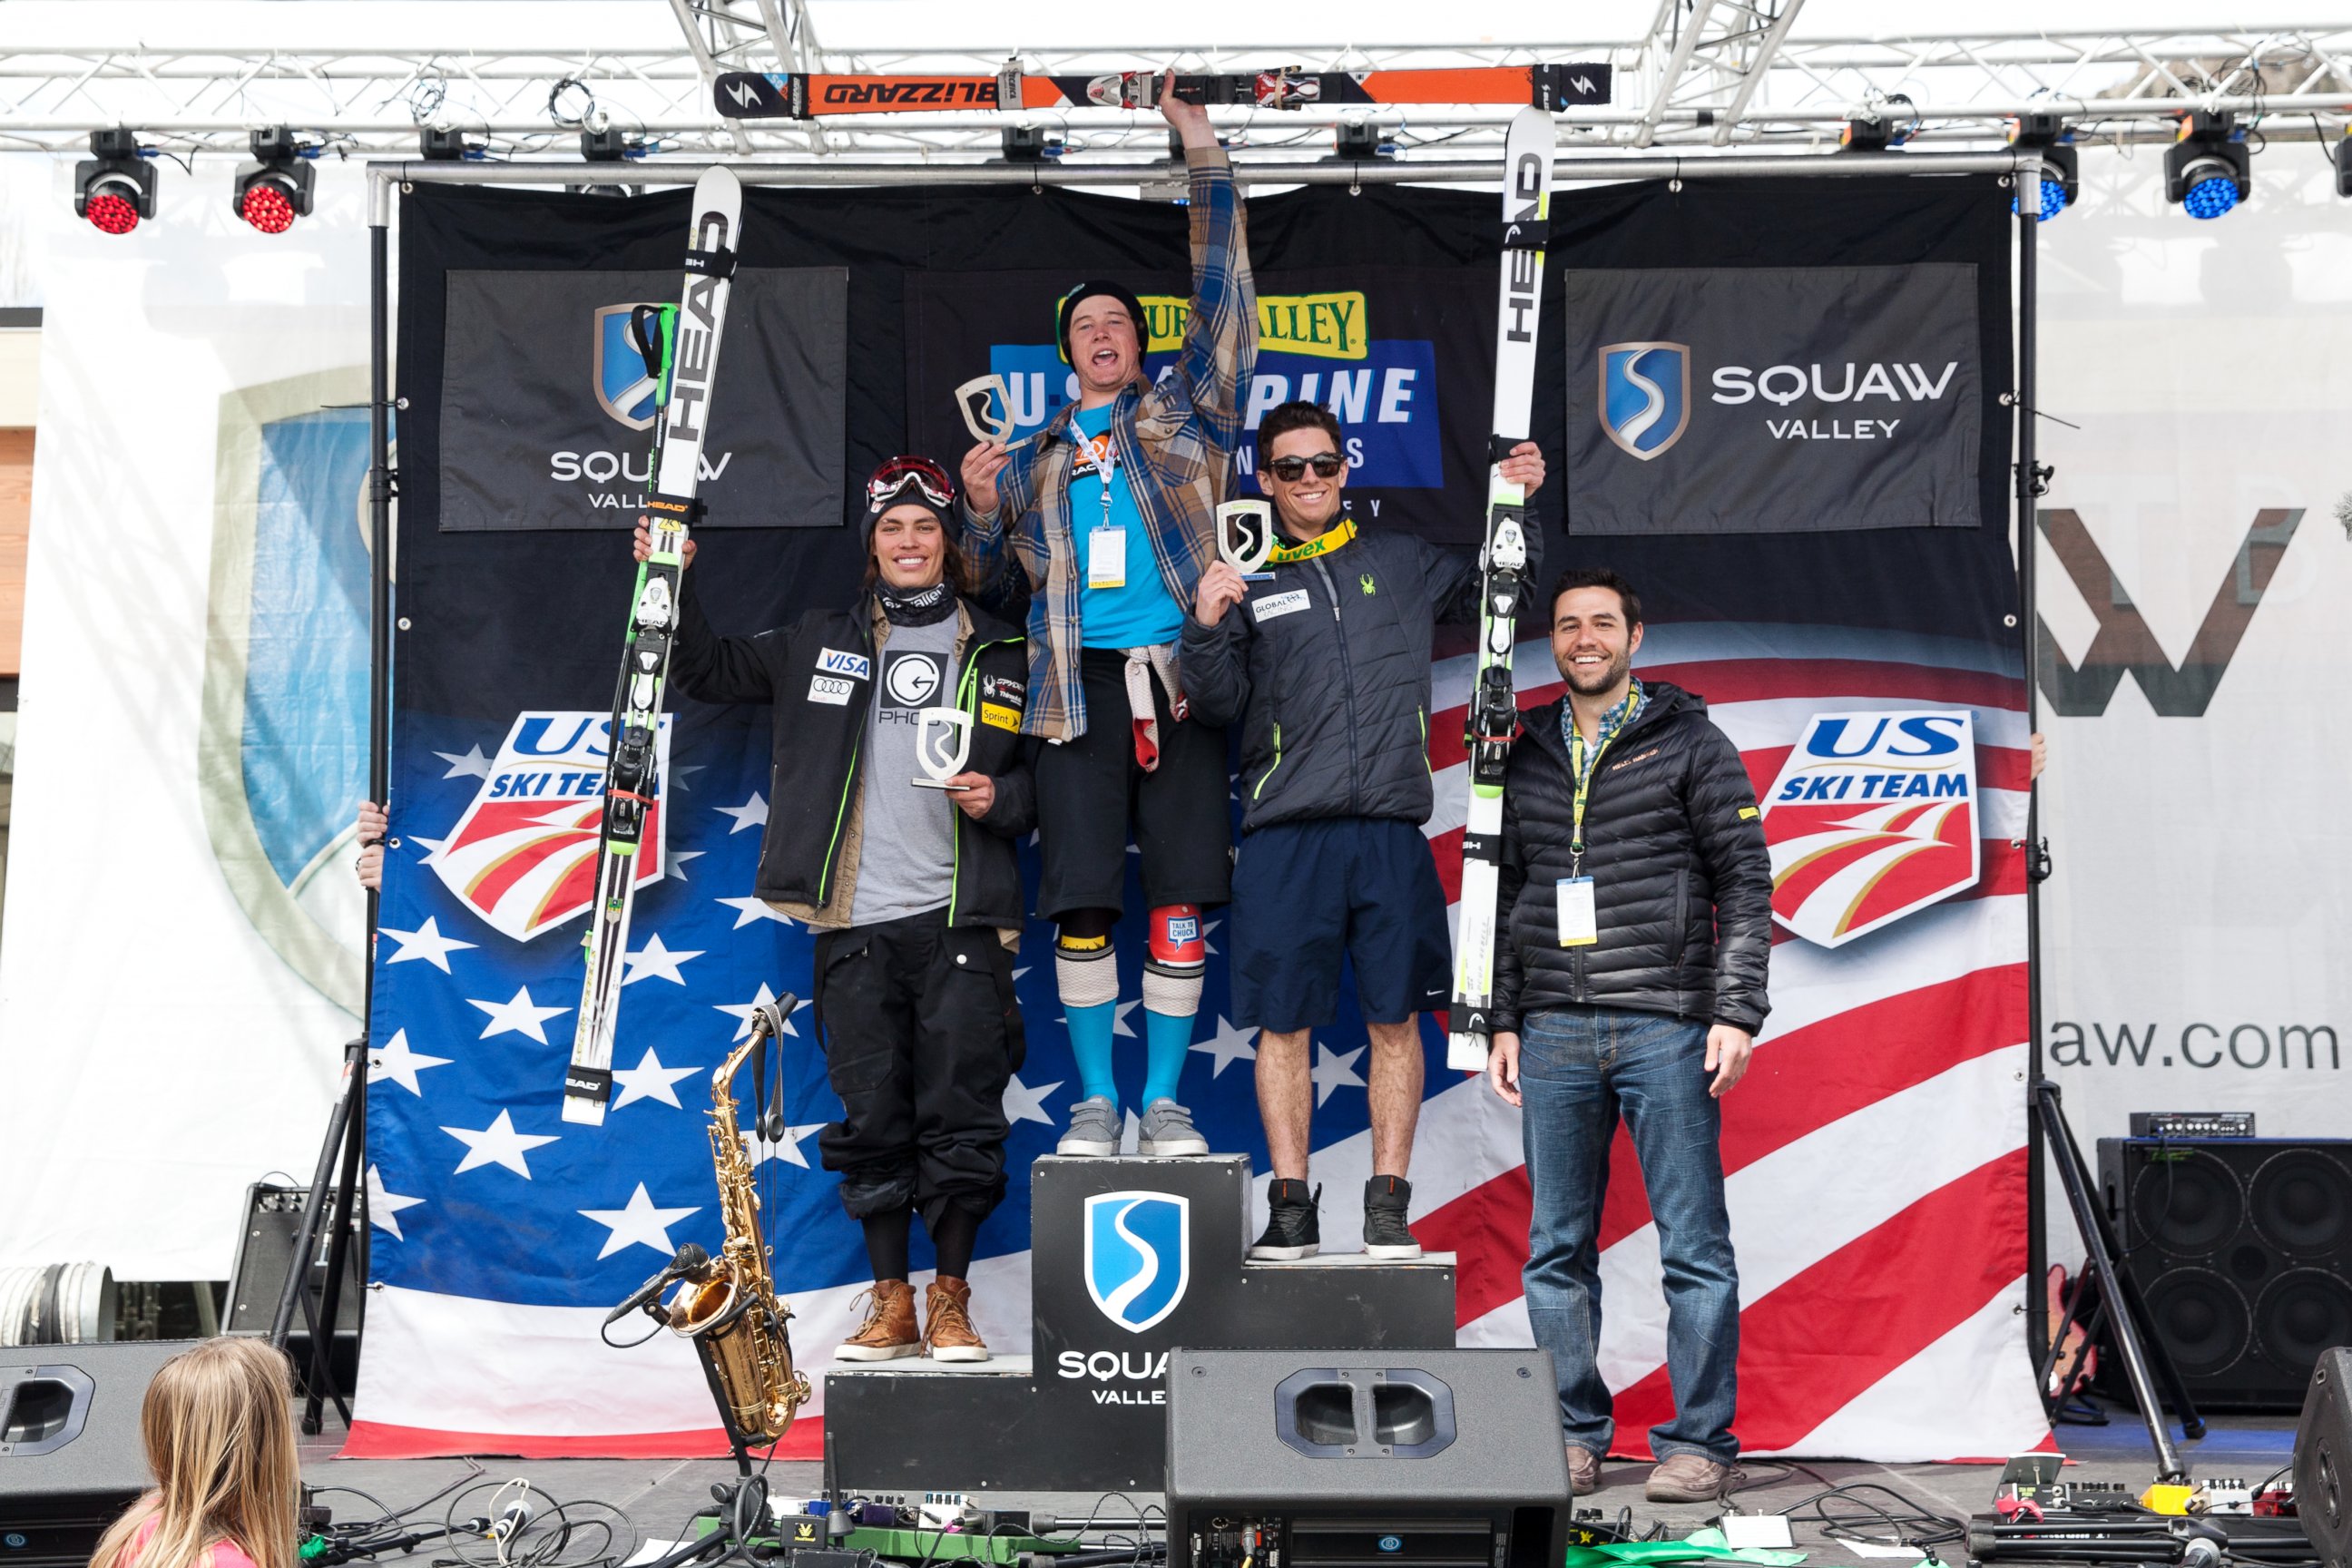 PHOTO: At Center, Bryce Astle, at the 2014 Nature Valley U.S. Alpine Championships at Squaw Valley Resort in Olympic Valley, Calif.